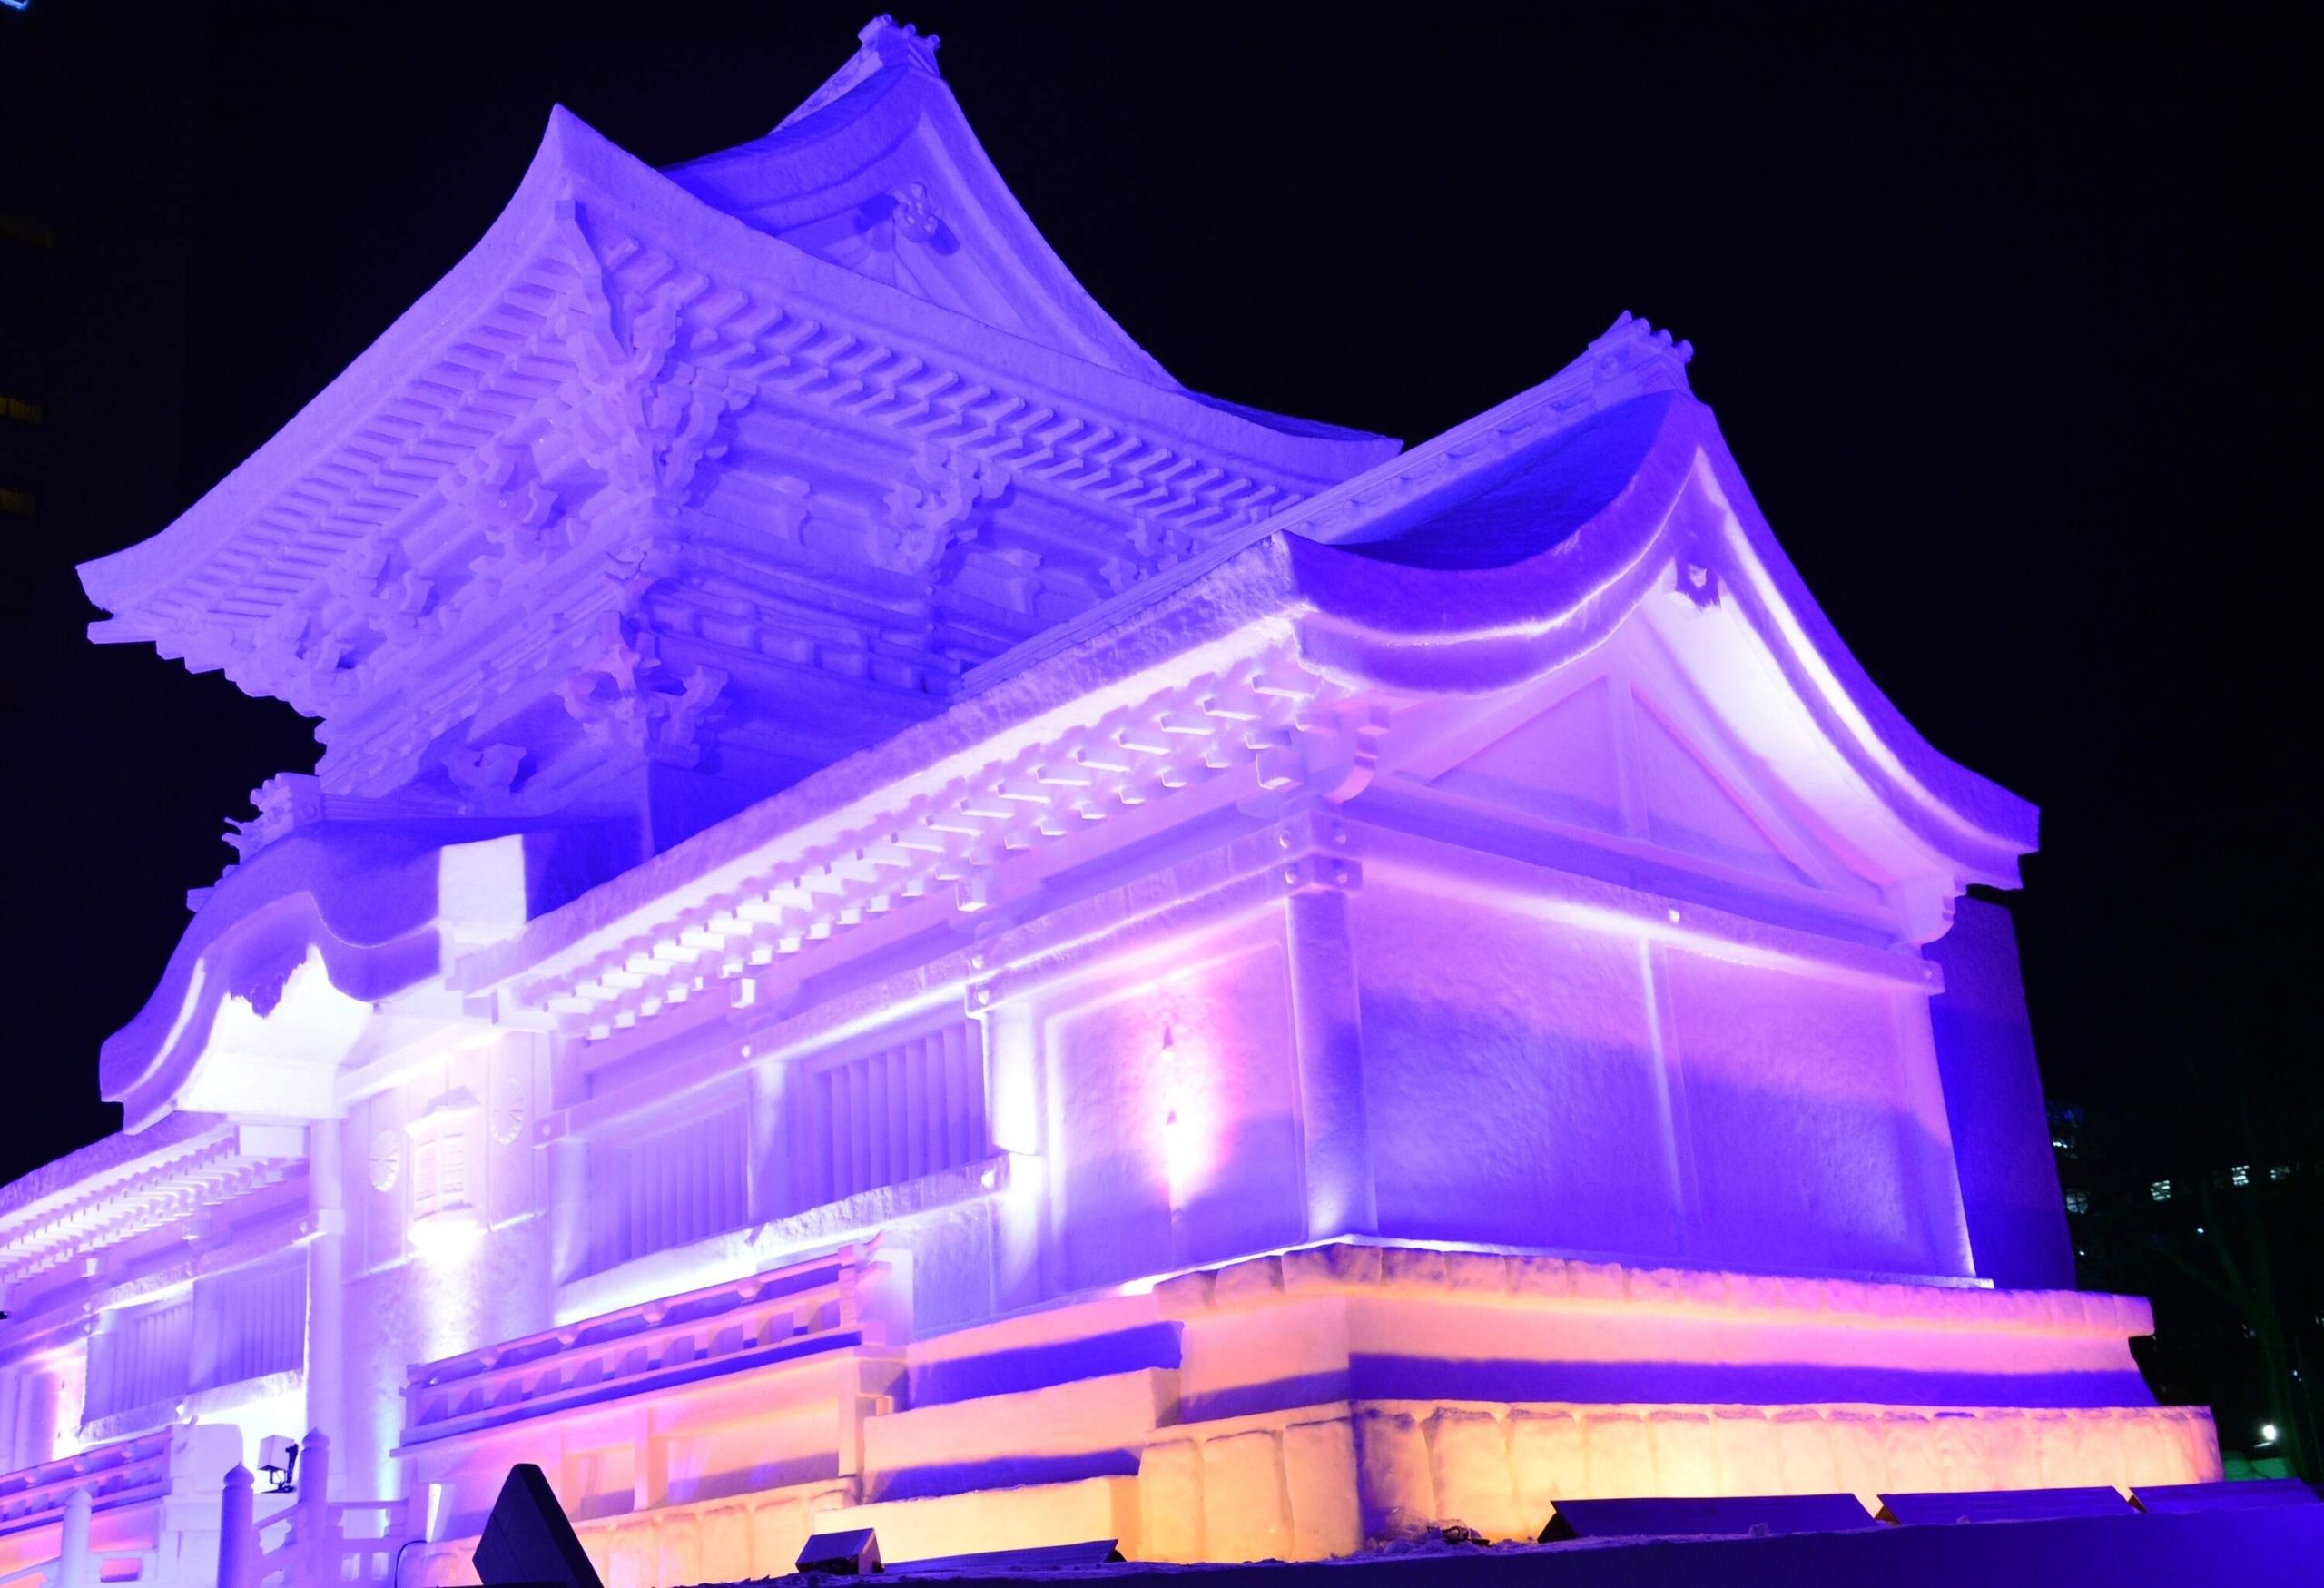 A brightly lit traditional Japanese building made of snow in purple light.